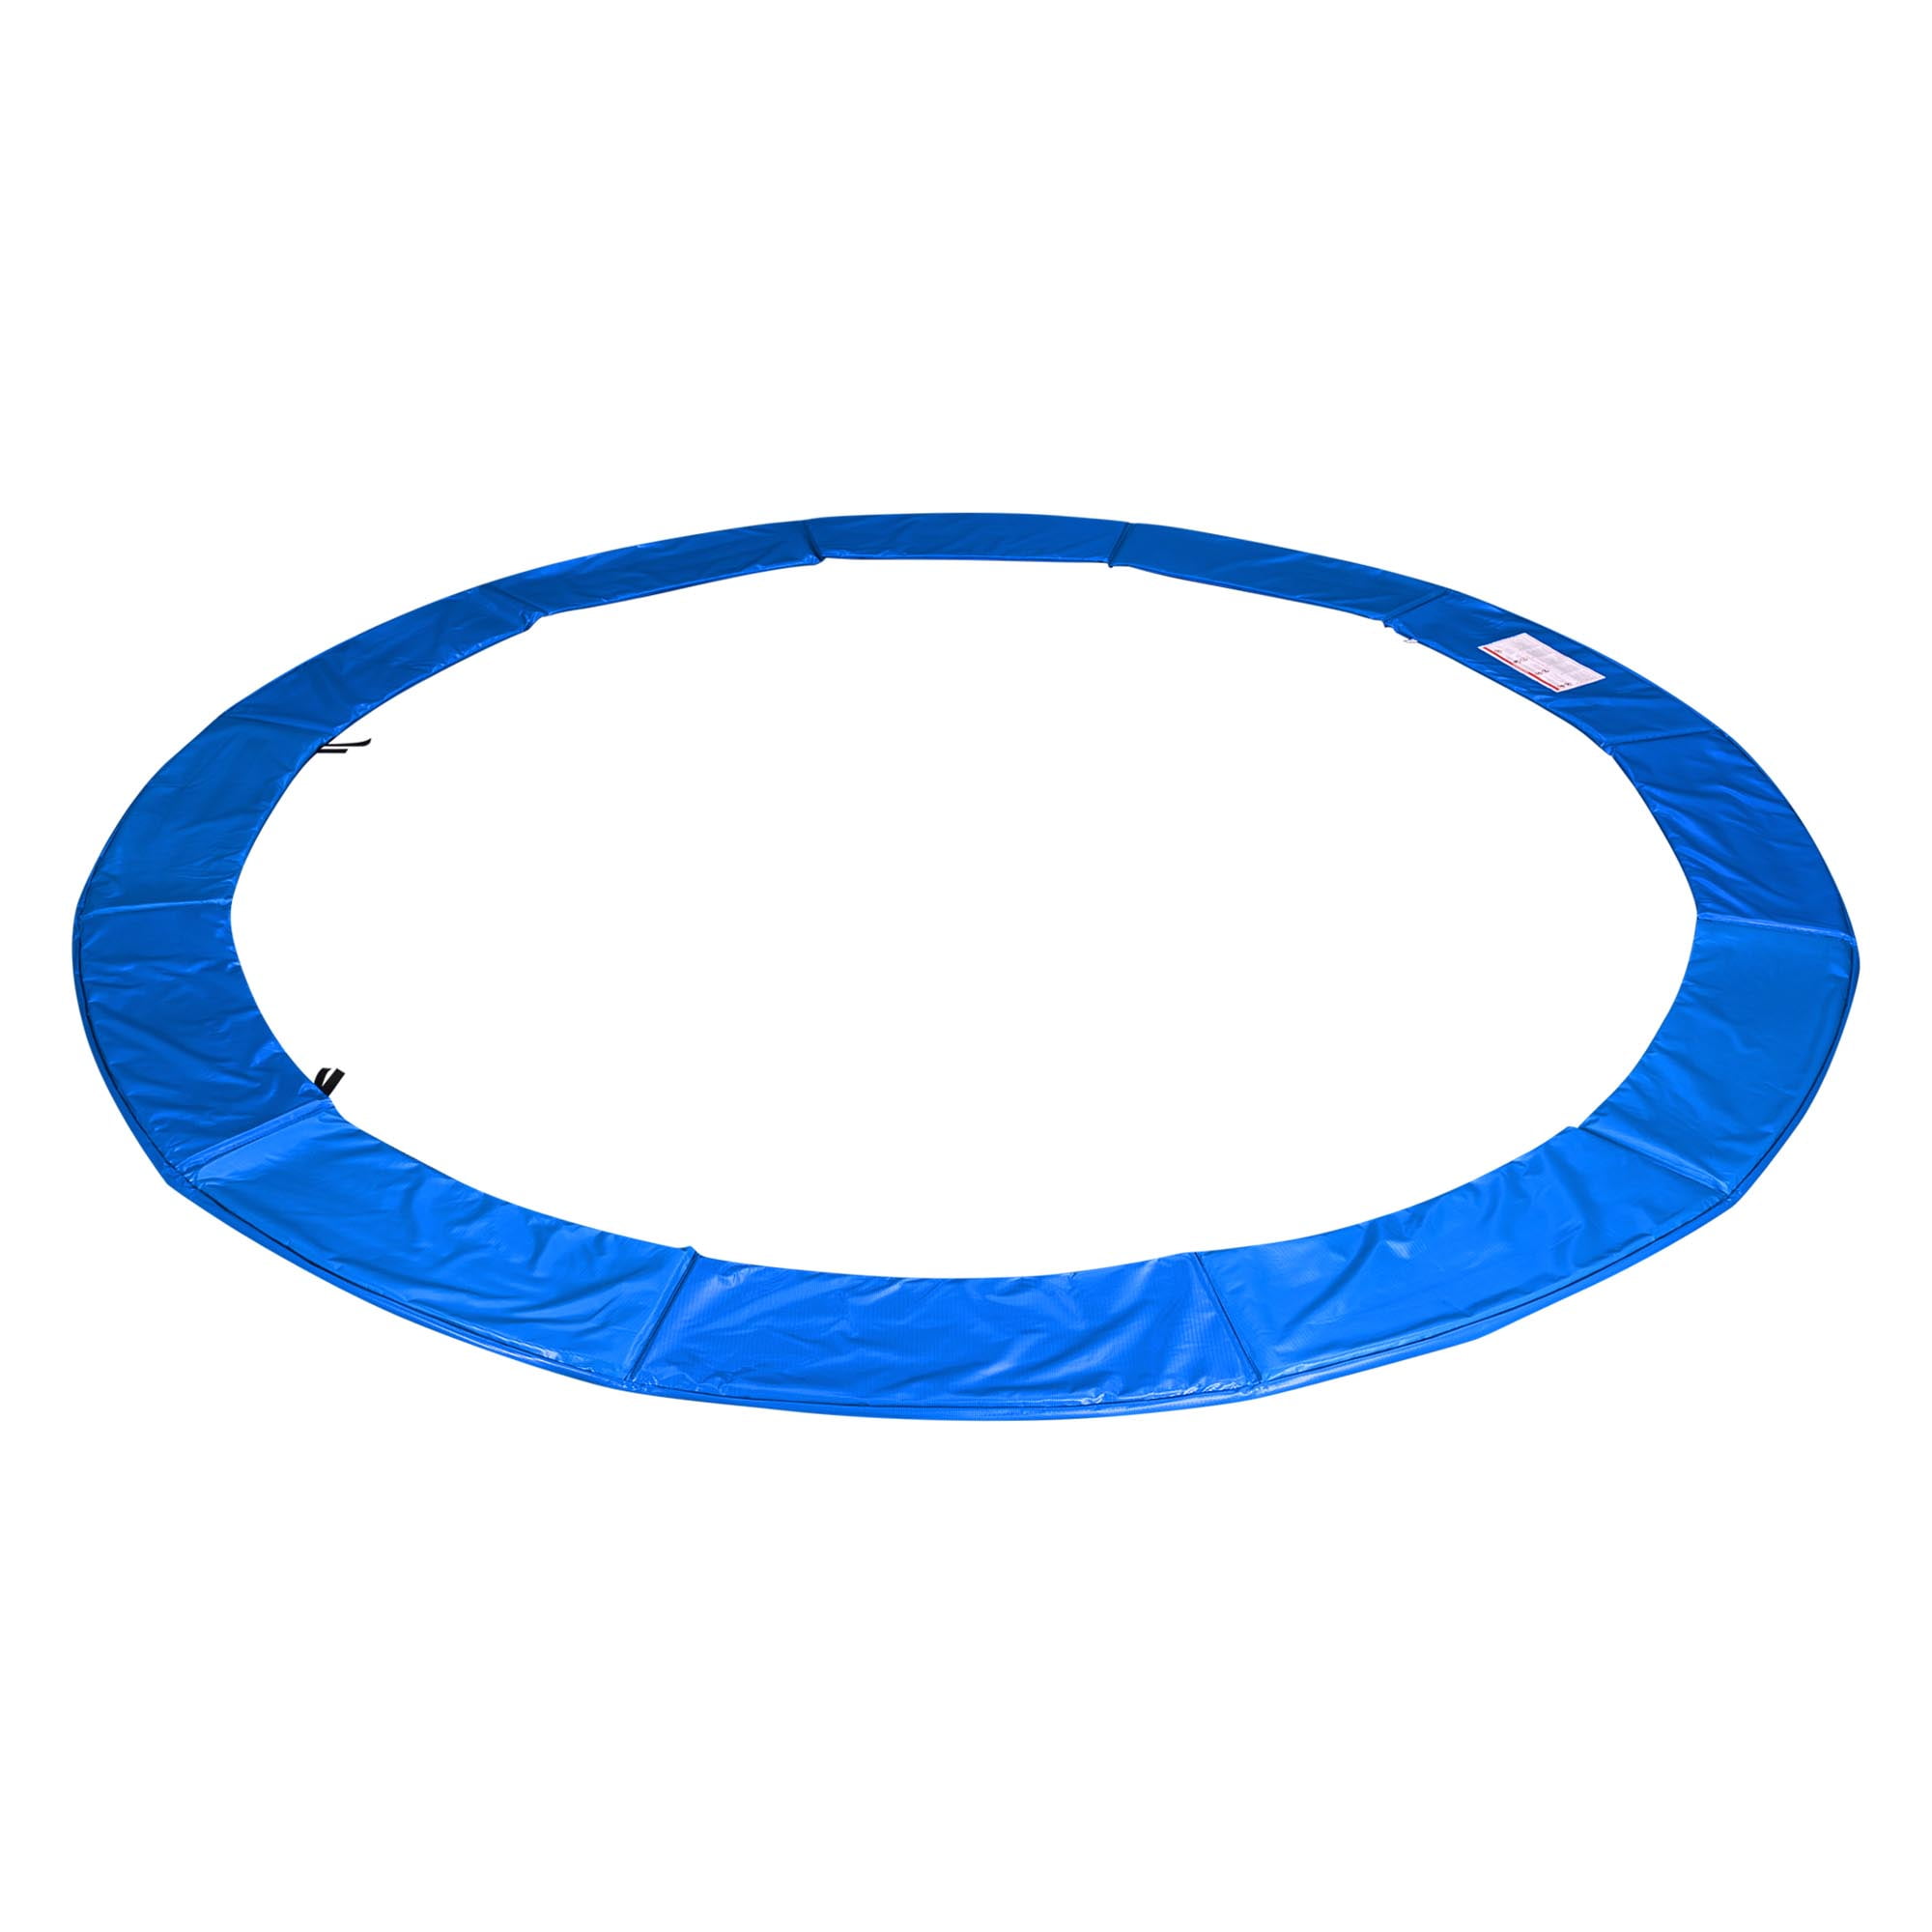 Yescom 12' Trampoline Safety Pad Round Frame Replacement Walmart.com